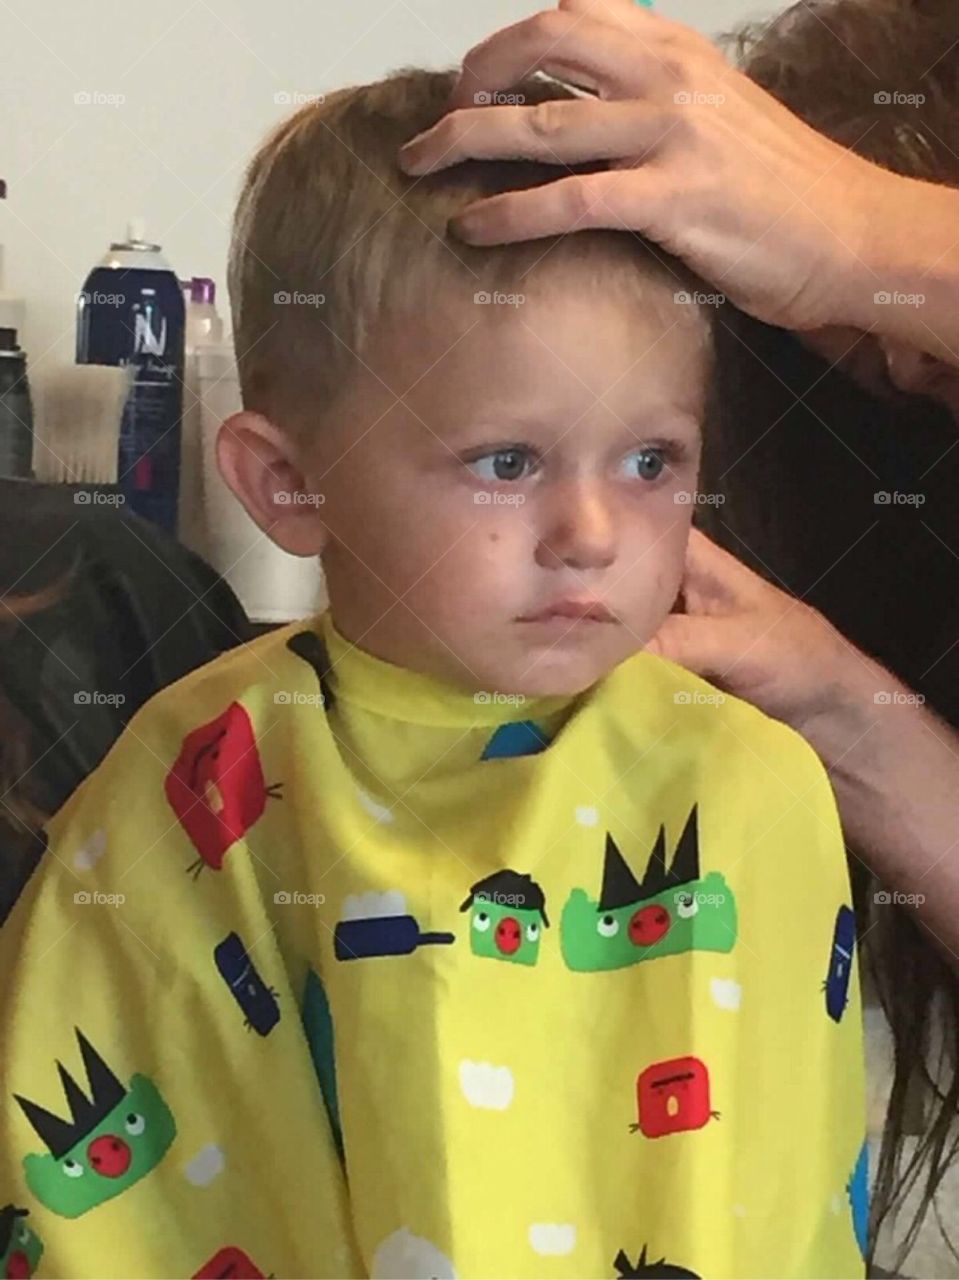 Young boy getting a hair cut at barbershop